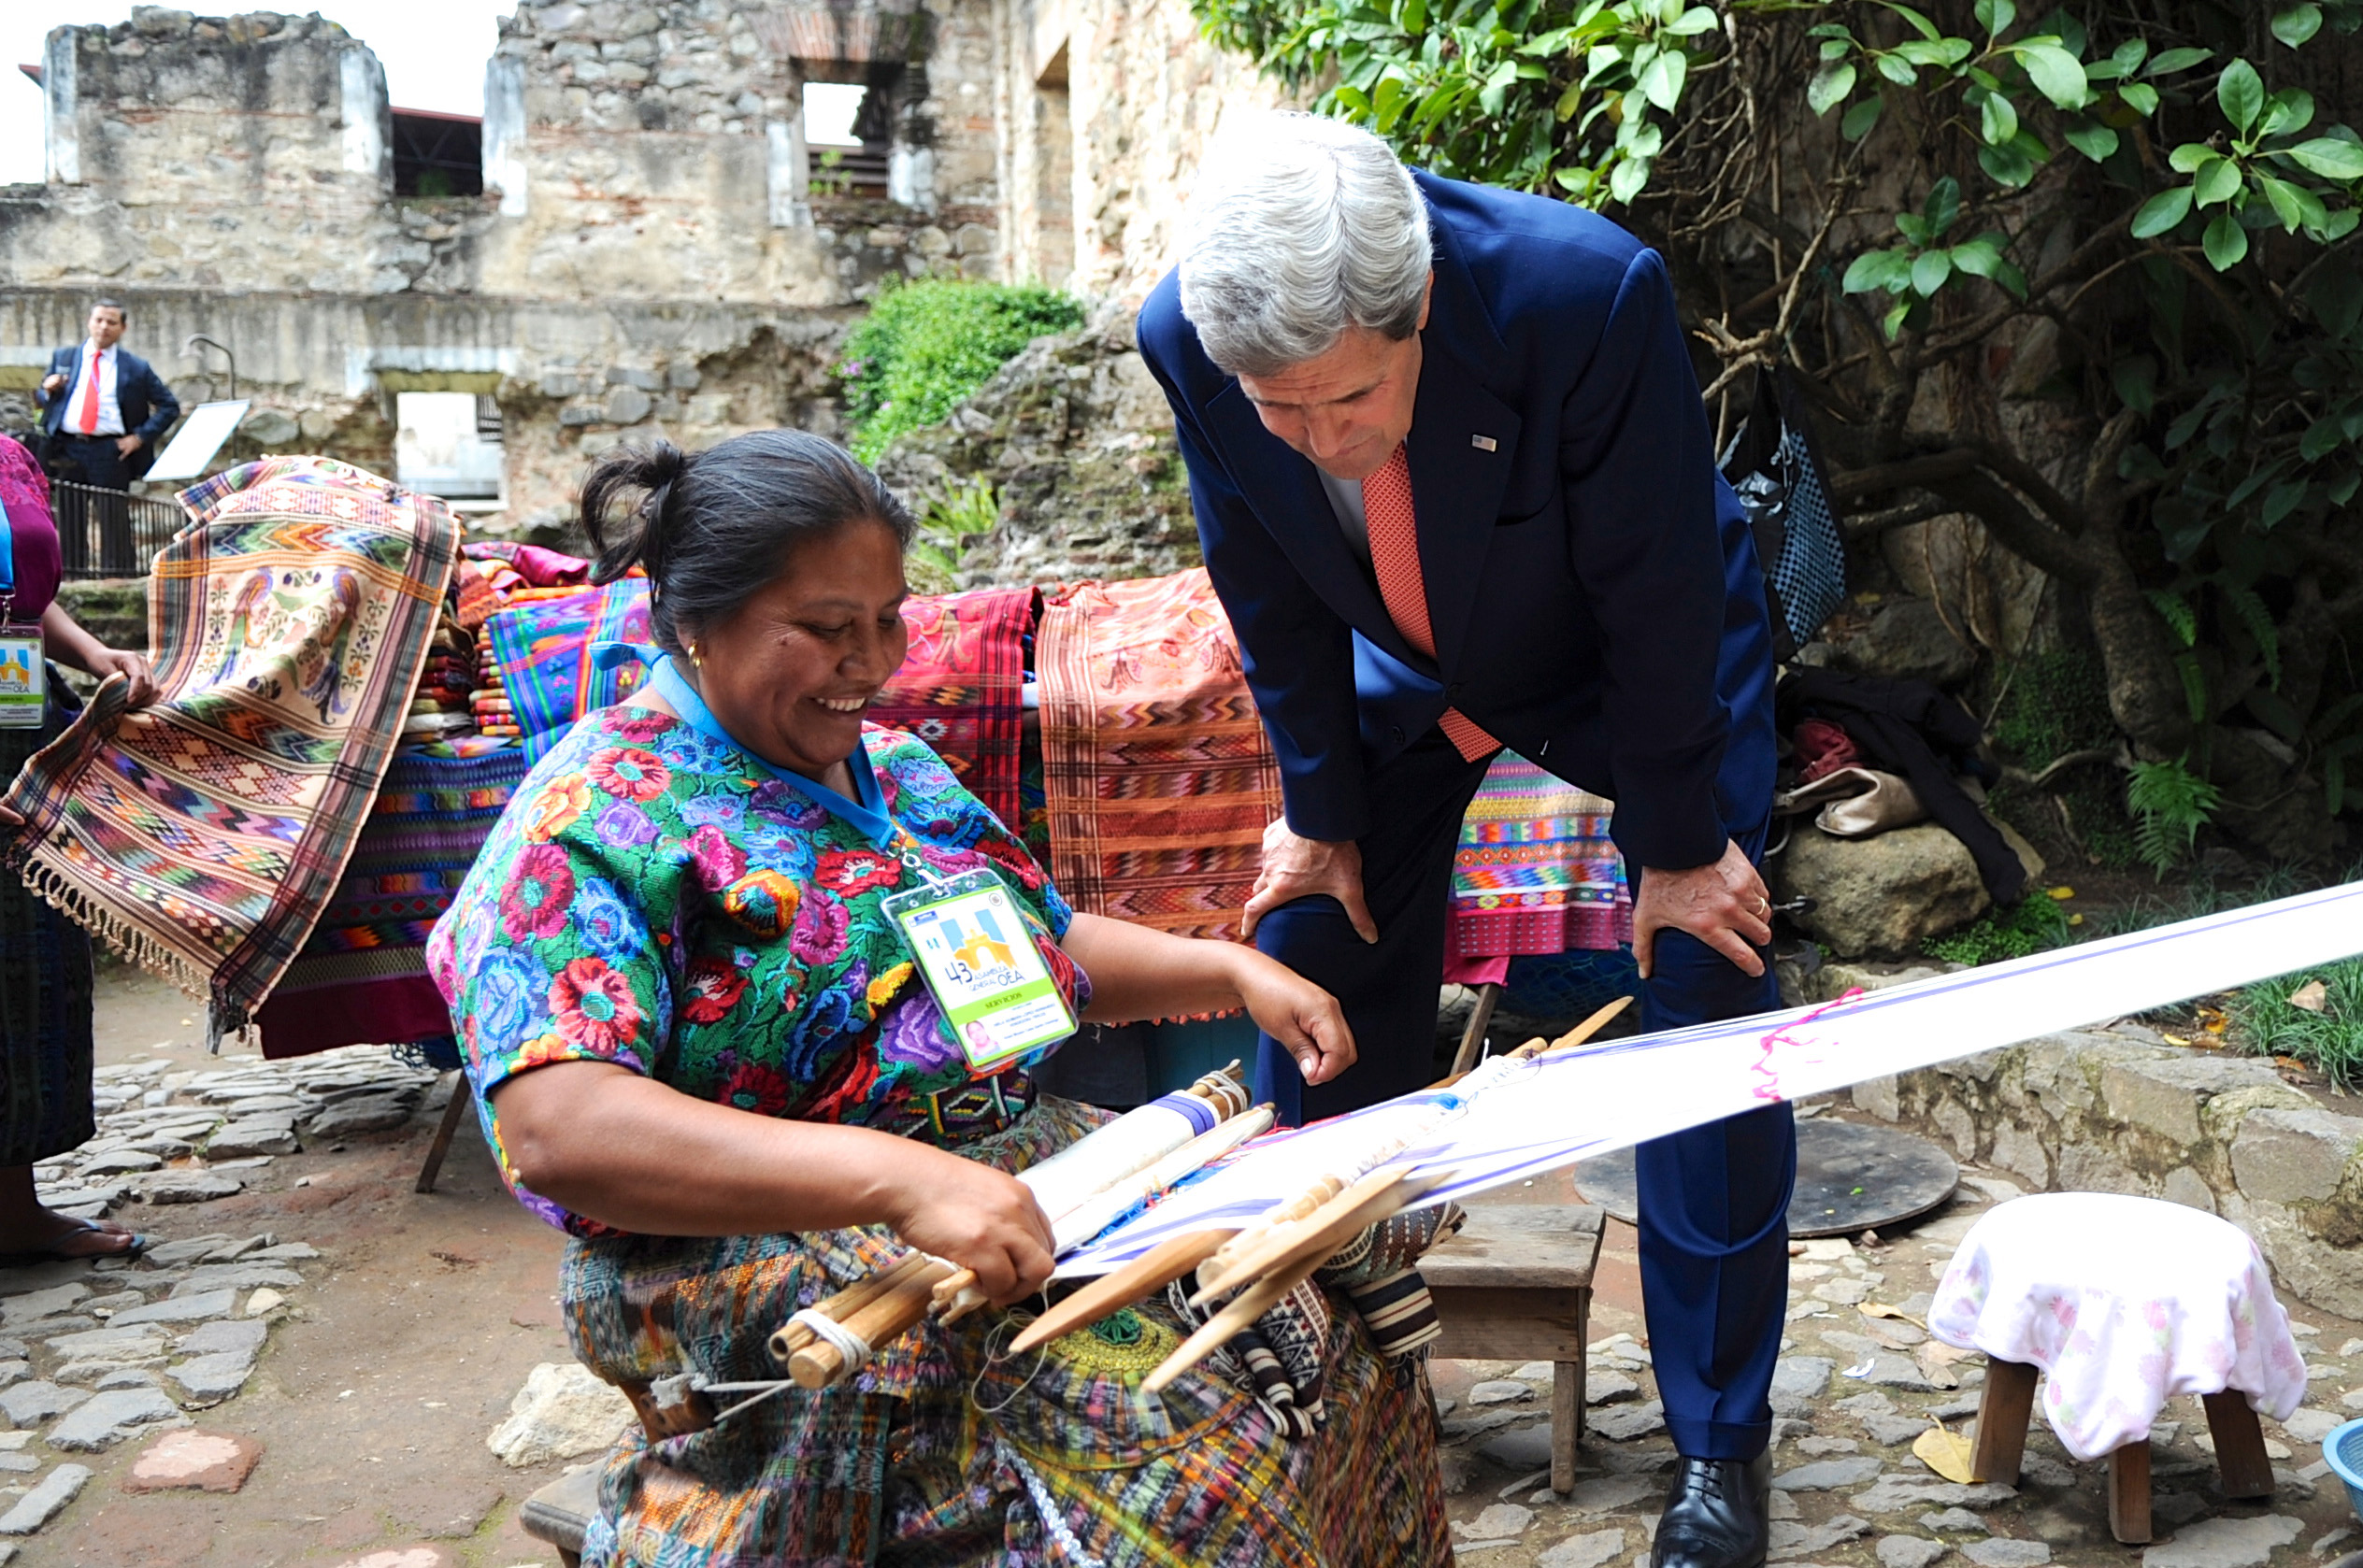 Secretary Kerry Examines Goods Made By a Textile Worker (8971071525)